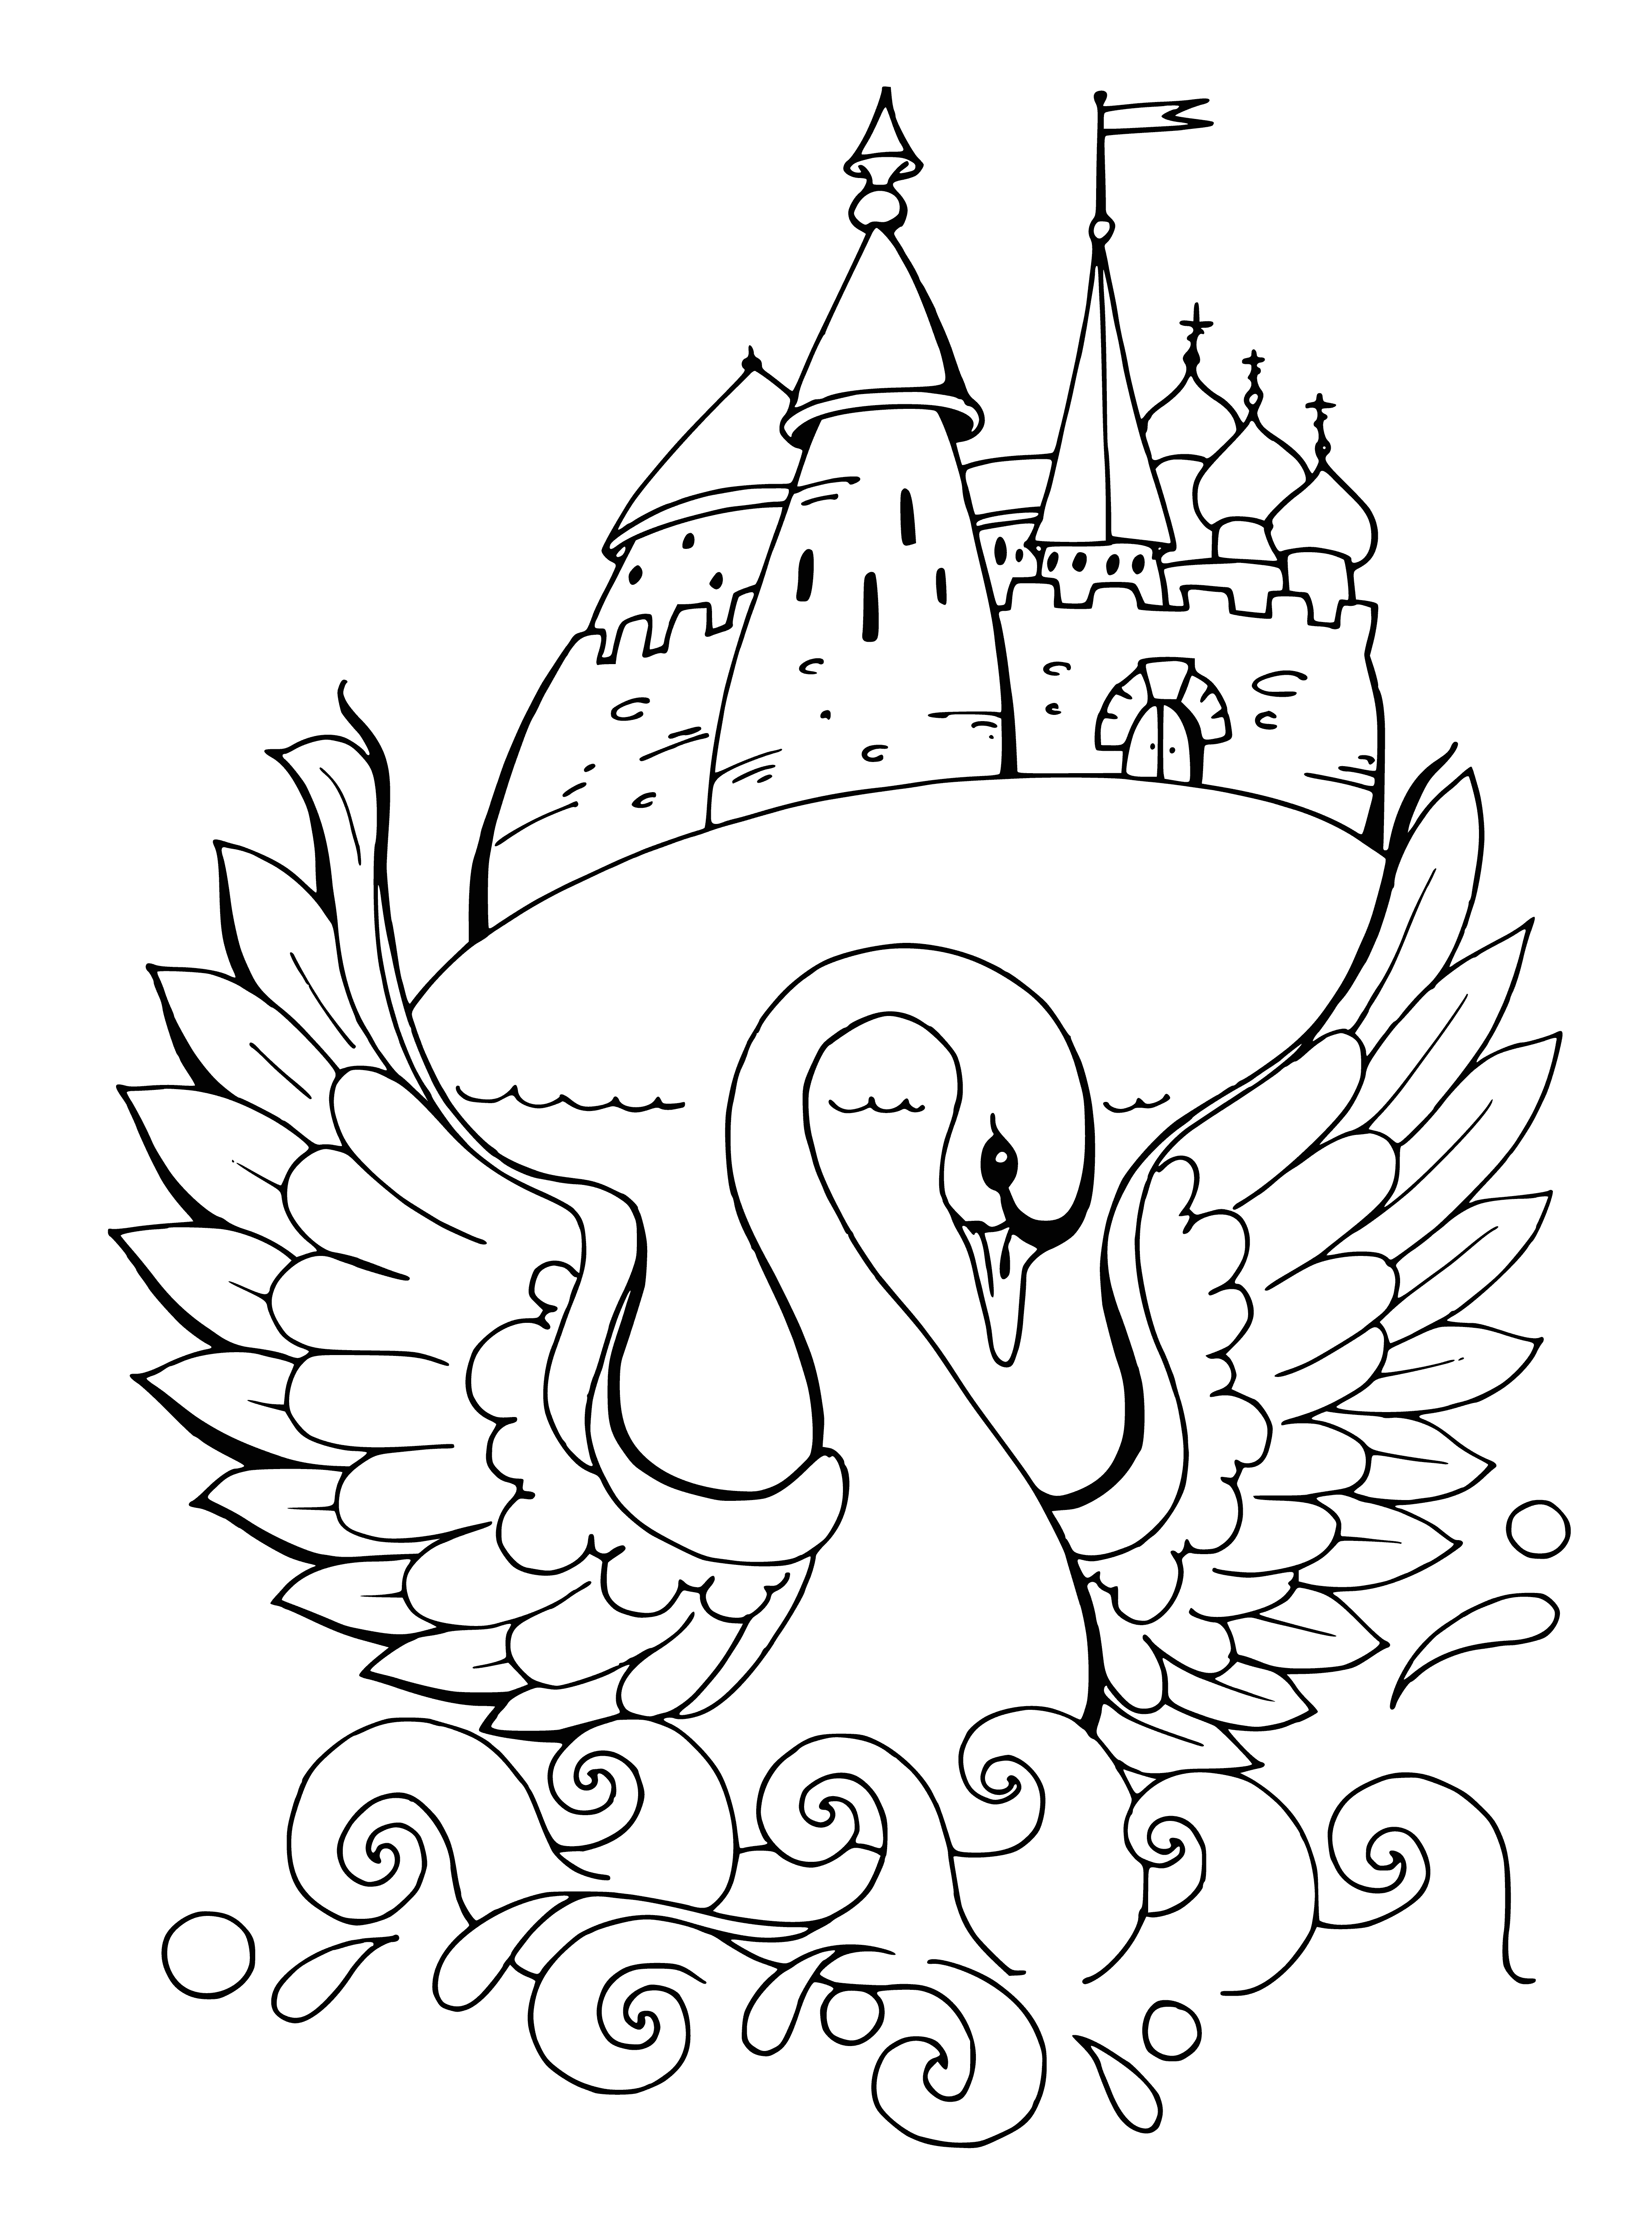 coloring page: A white swan glides gracefully through calm water on a coloring page, its neck curved, wings outstretched and legs trailing behind. #coloring